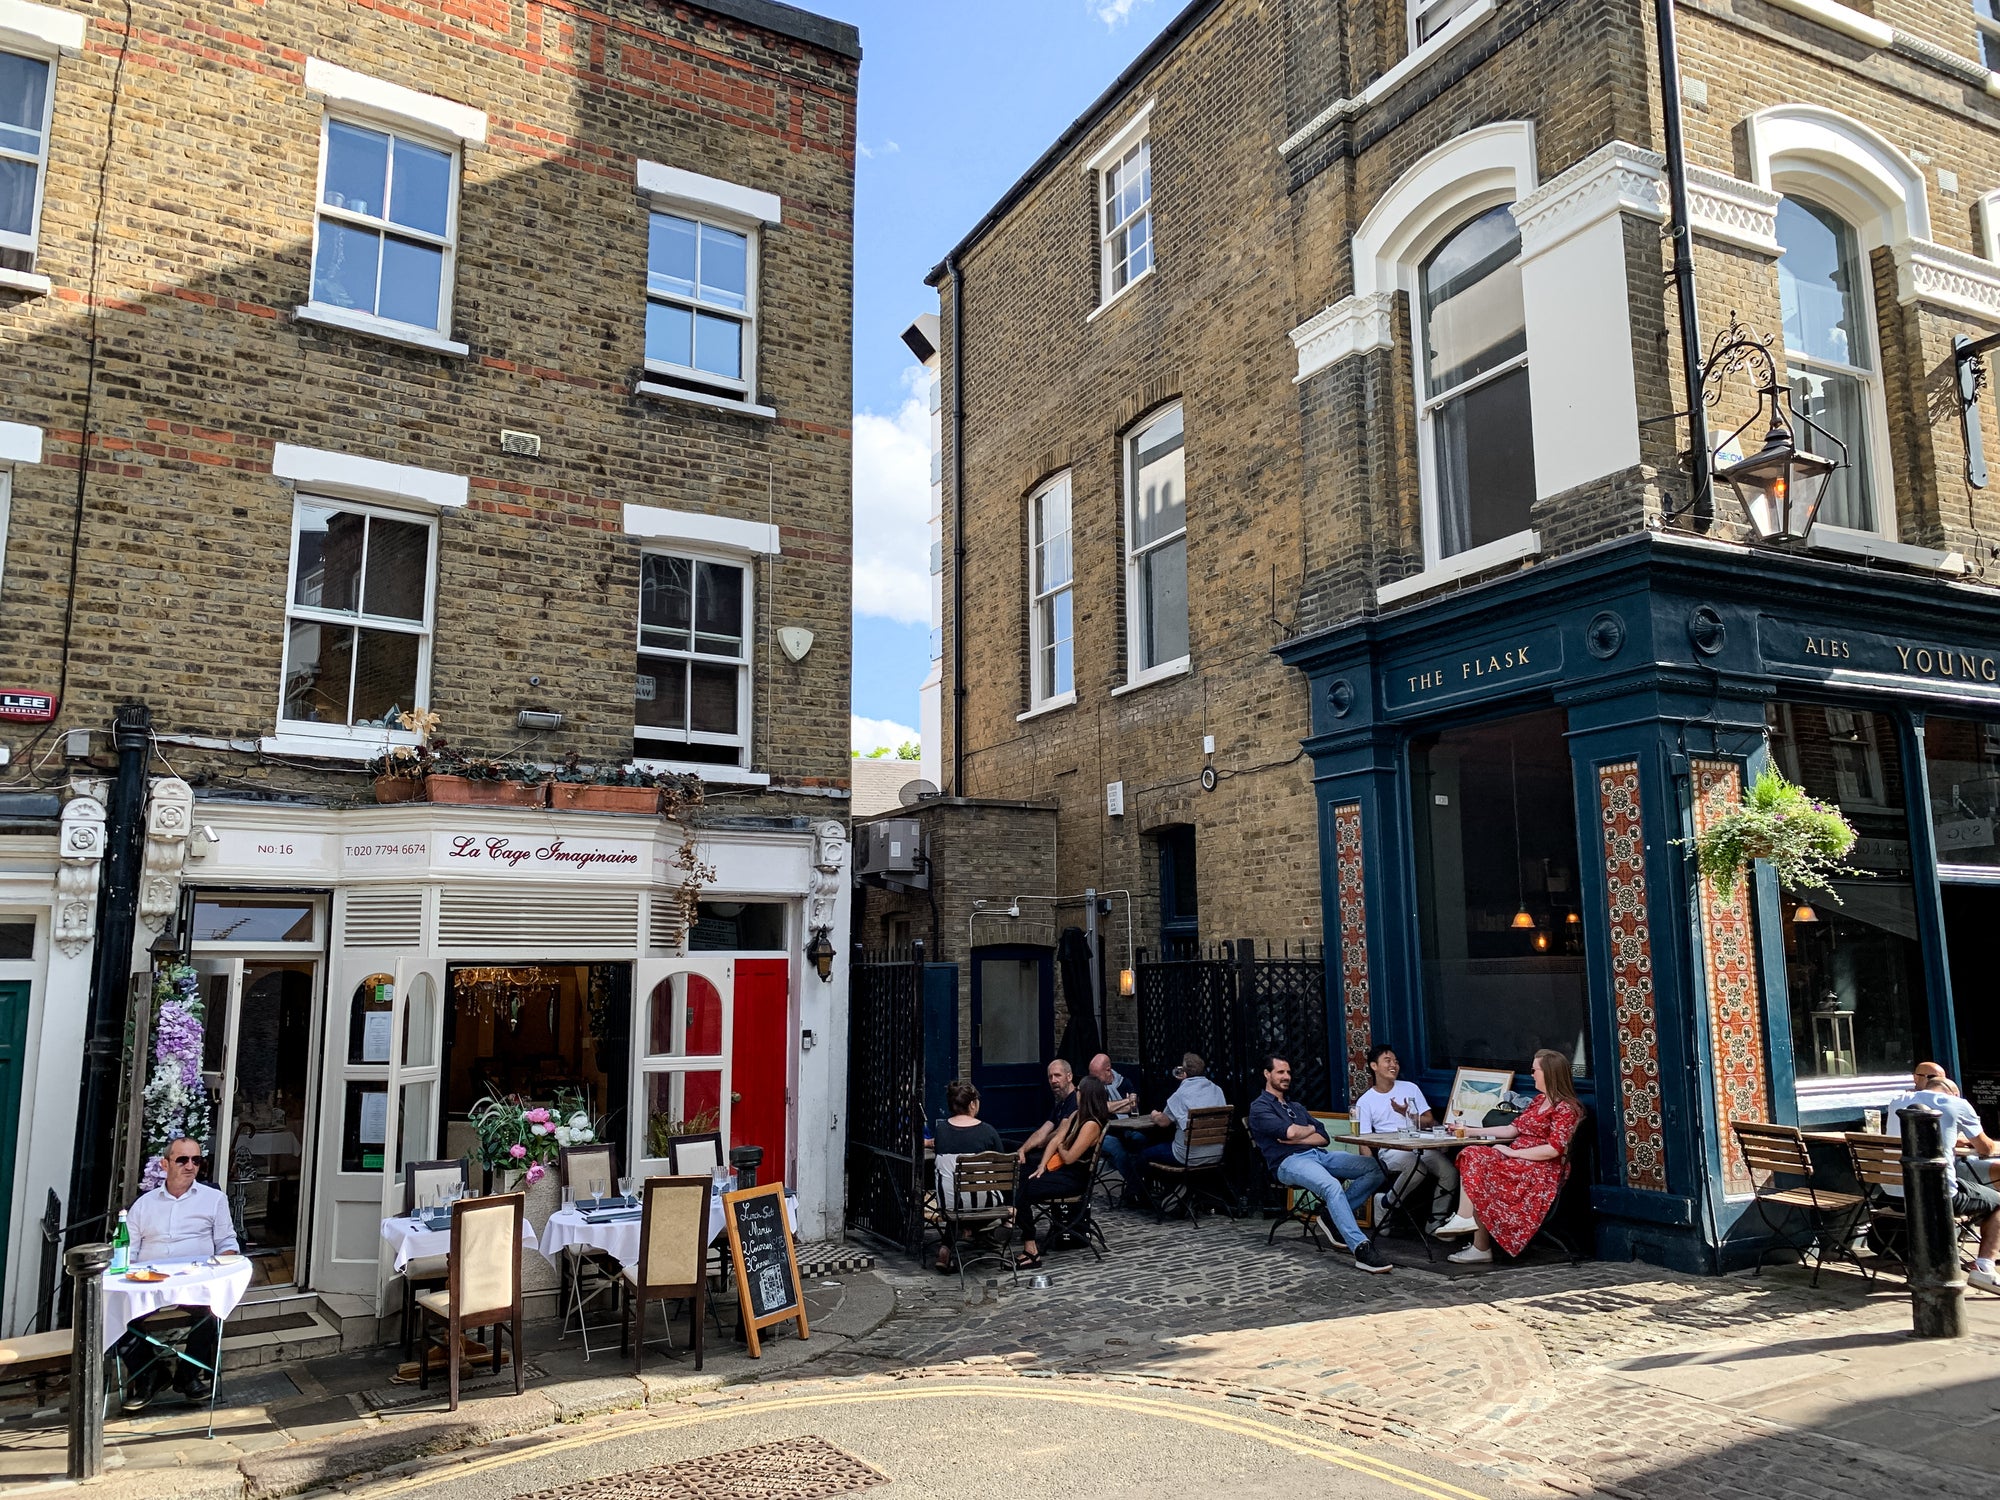 Flask Walk is home to quaint independent shops off Hampstead High Street